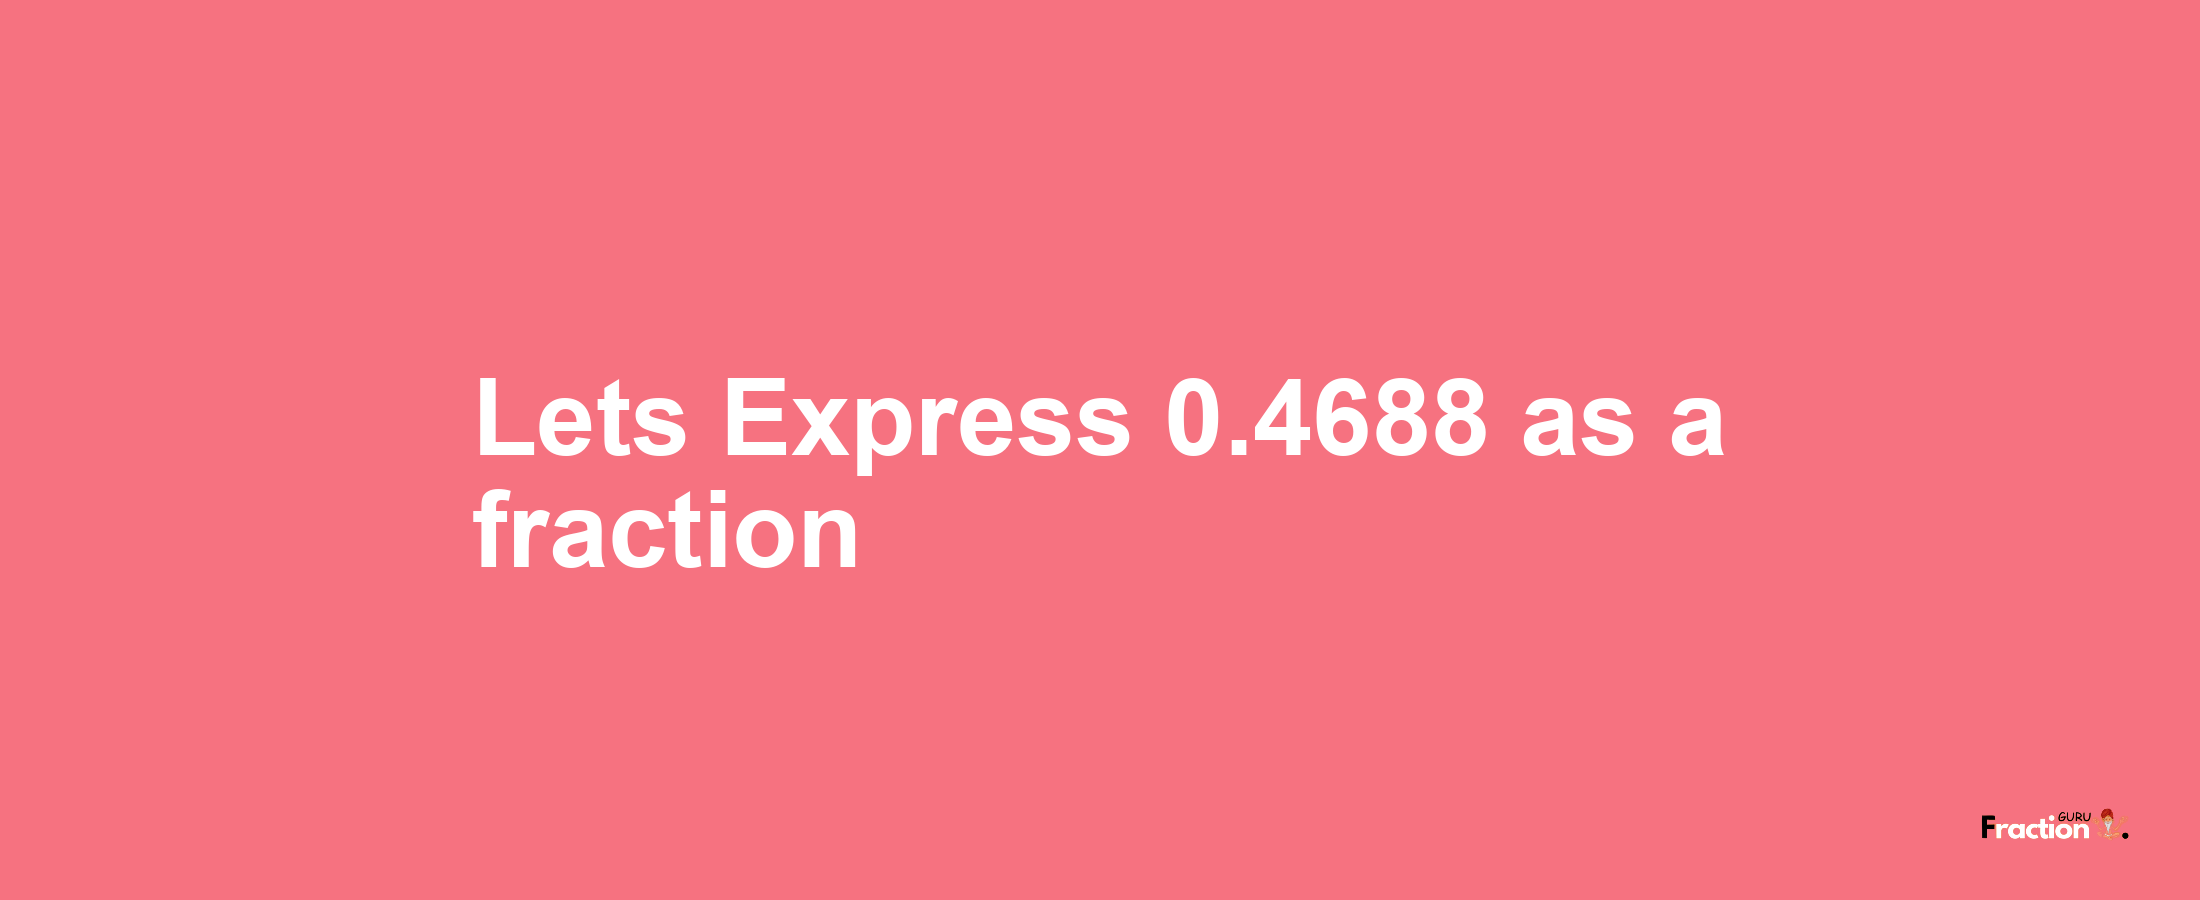 Lets Express 0.4688 as afraction